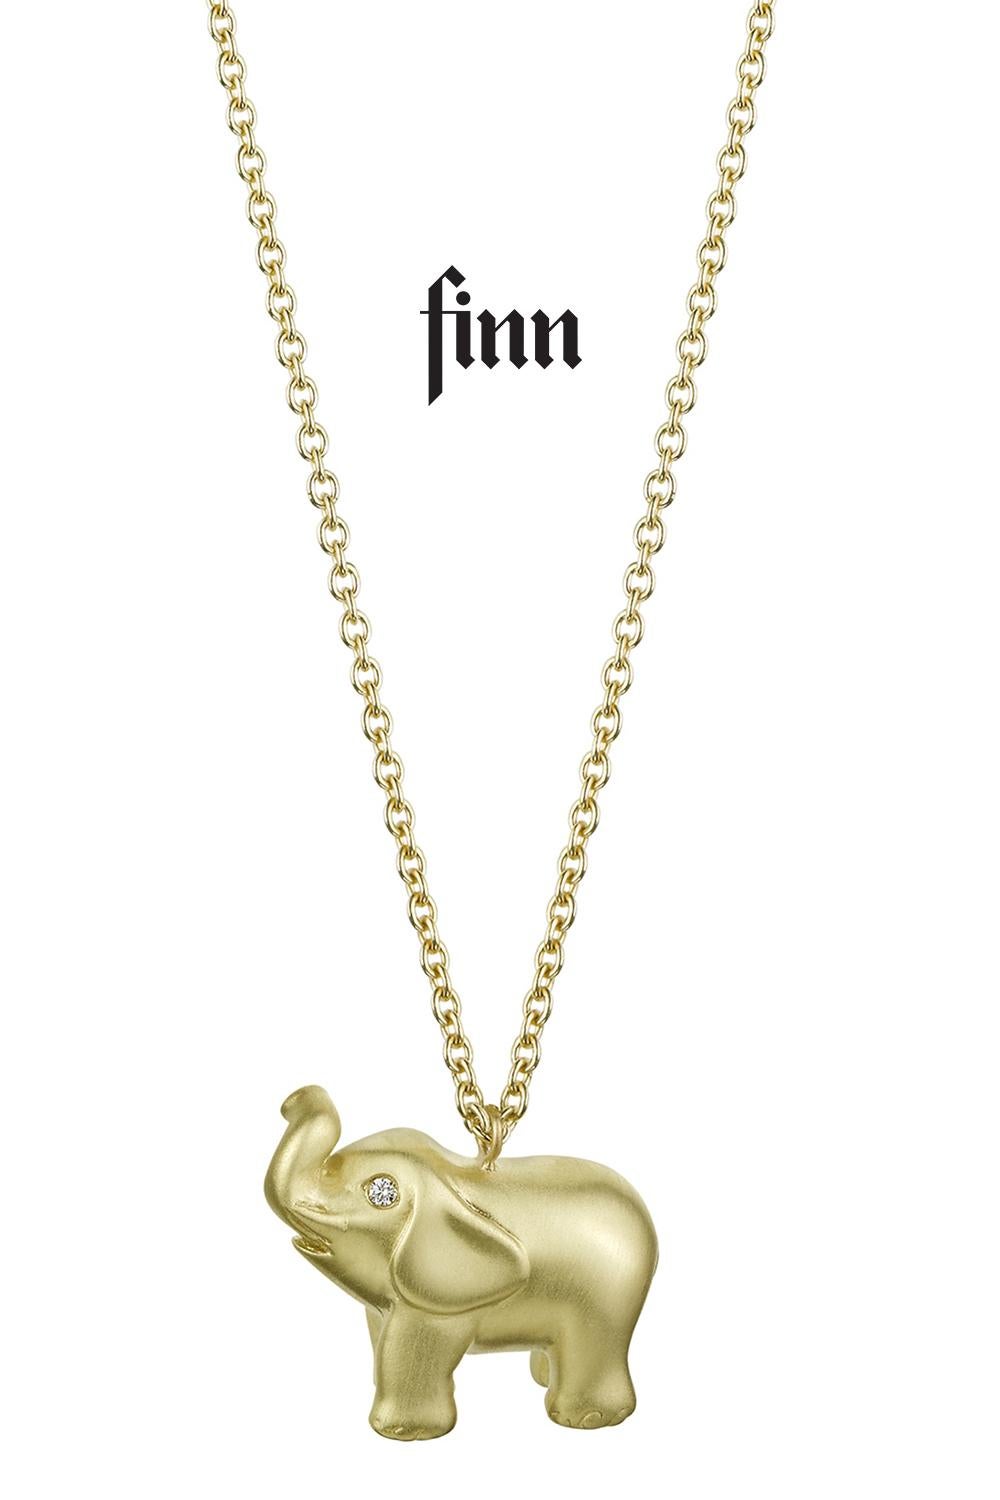 Elephants are good luck! Especially in 18 karat yellow gold. This cutie is solid gold and heavy. The pendant is 17mm long and 7.45mm wide with .02 carats of diamonds in the eyes. The pendant hangs on a 20